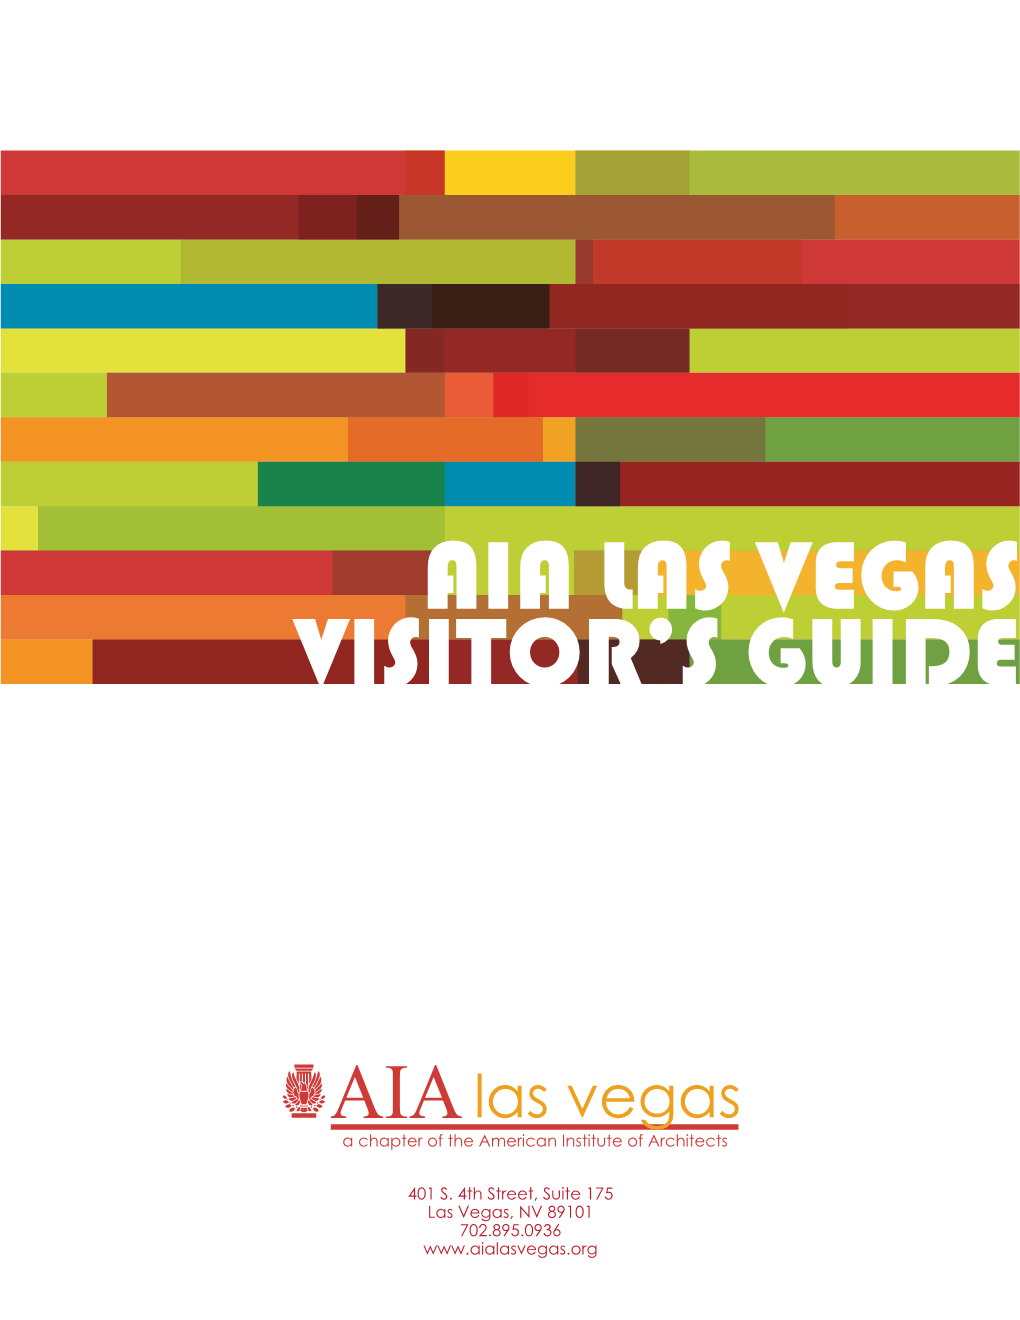 Aia Las Vegas Visitor's Guide